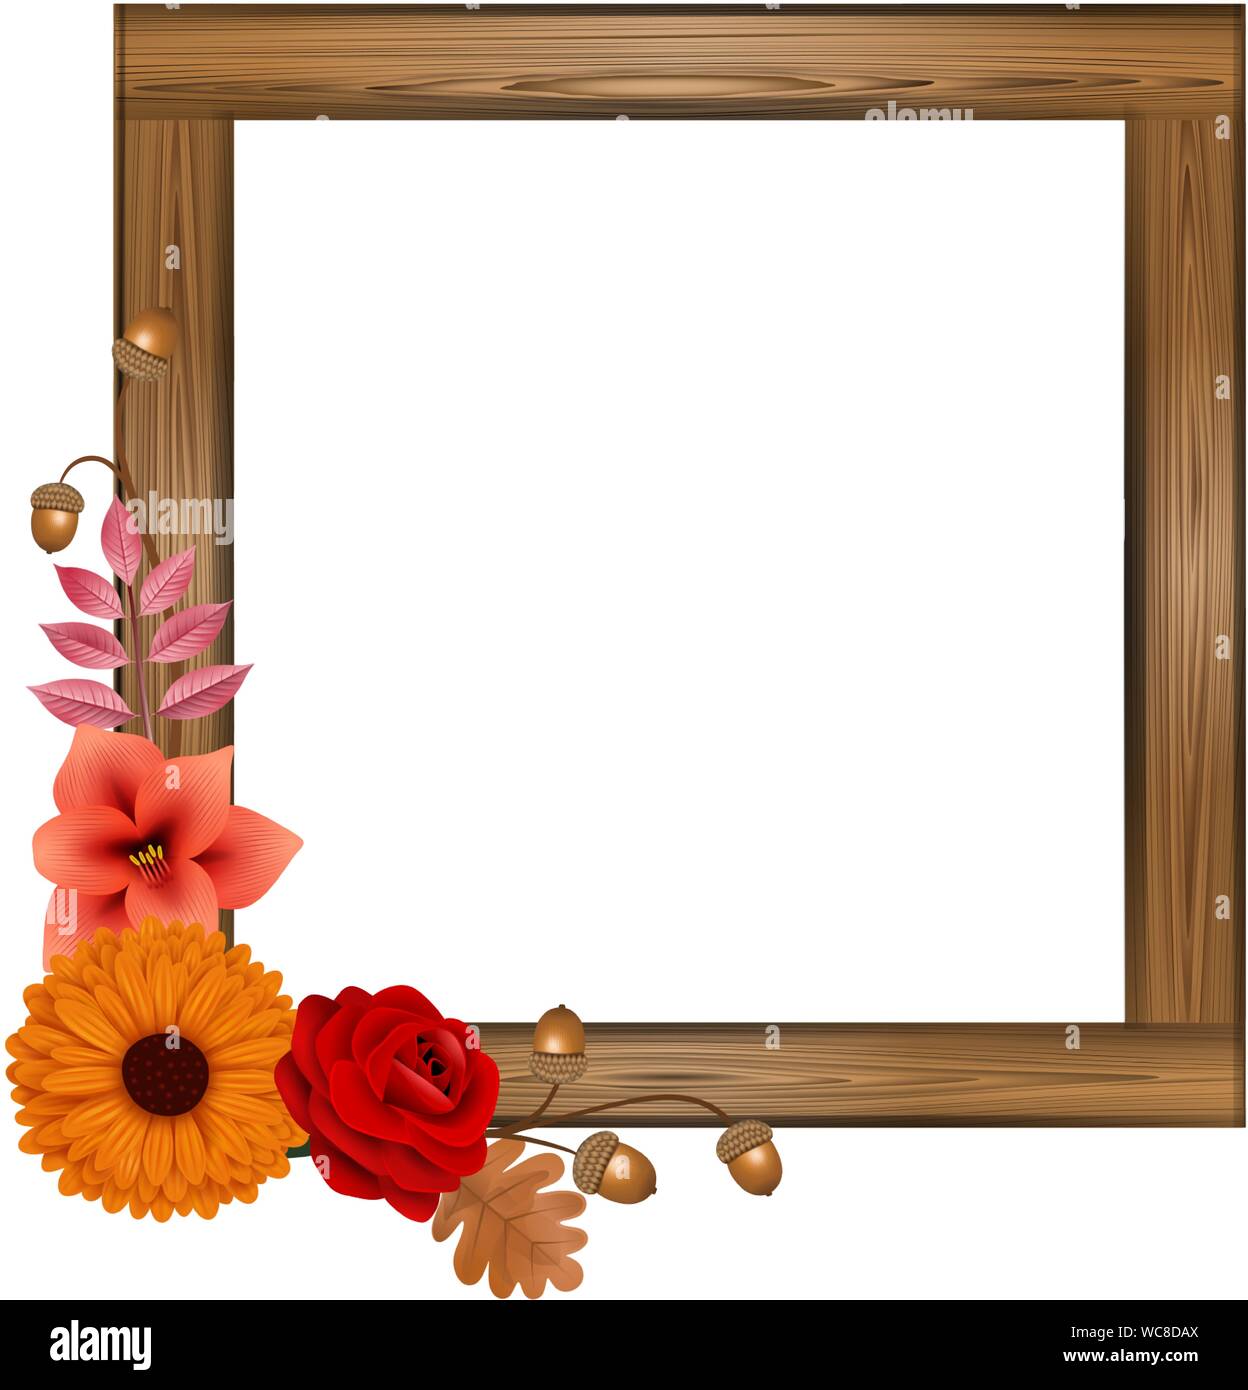 Wood Frame Square Background Stock Photo by ©DanFLCreativo 113877816